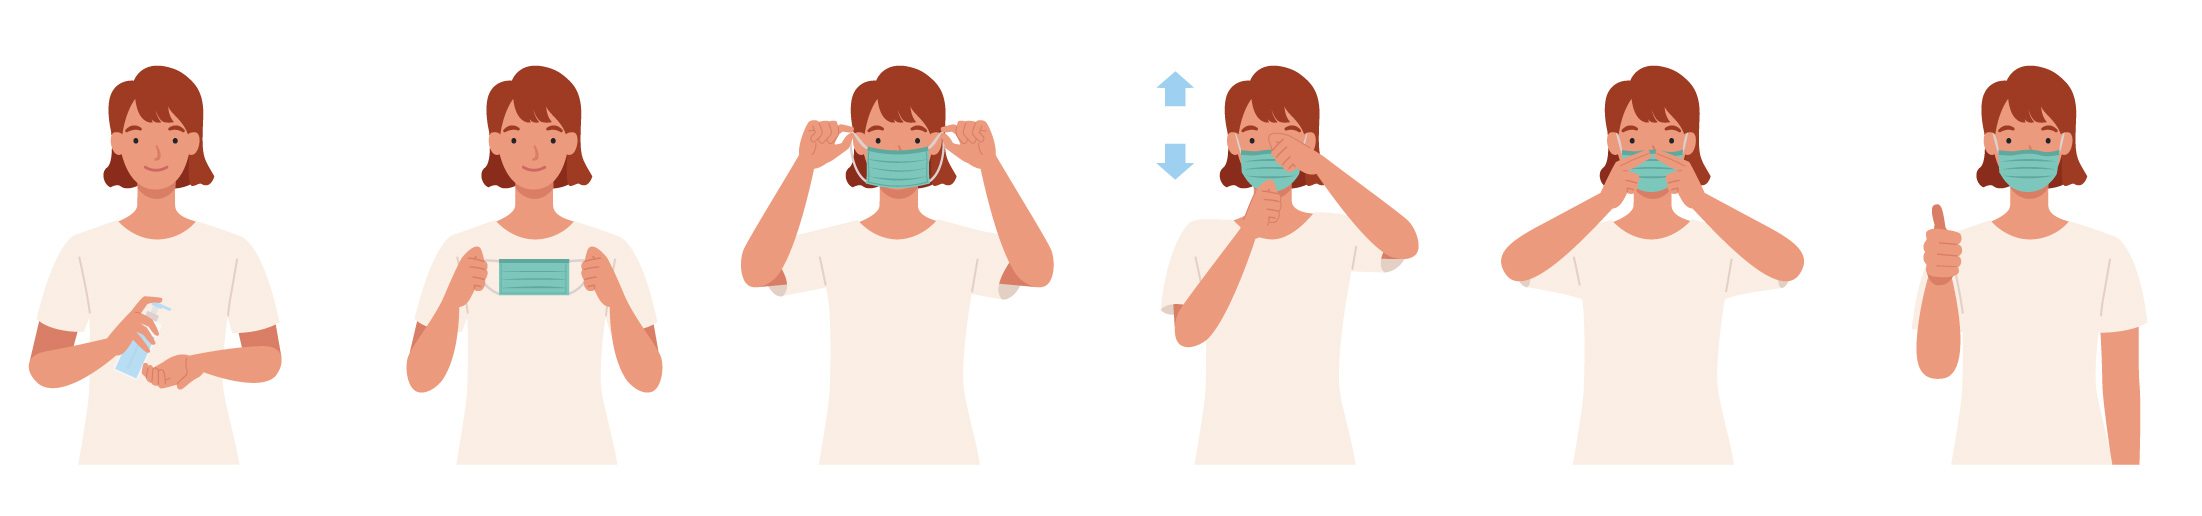 drawing of person demonstrating how to properly wear a face mask